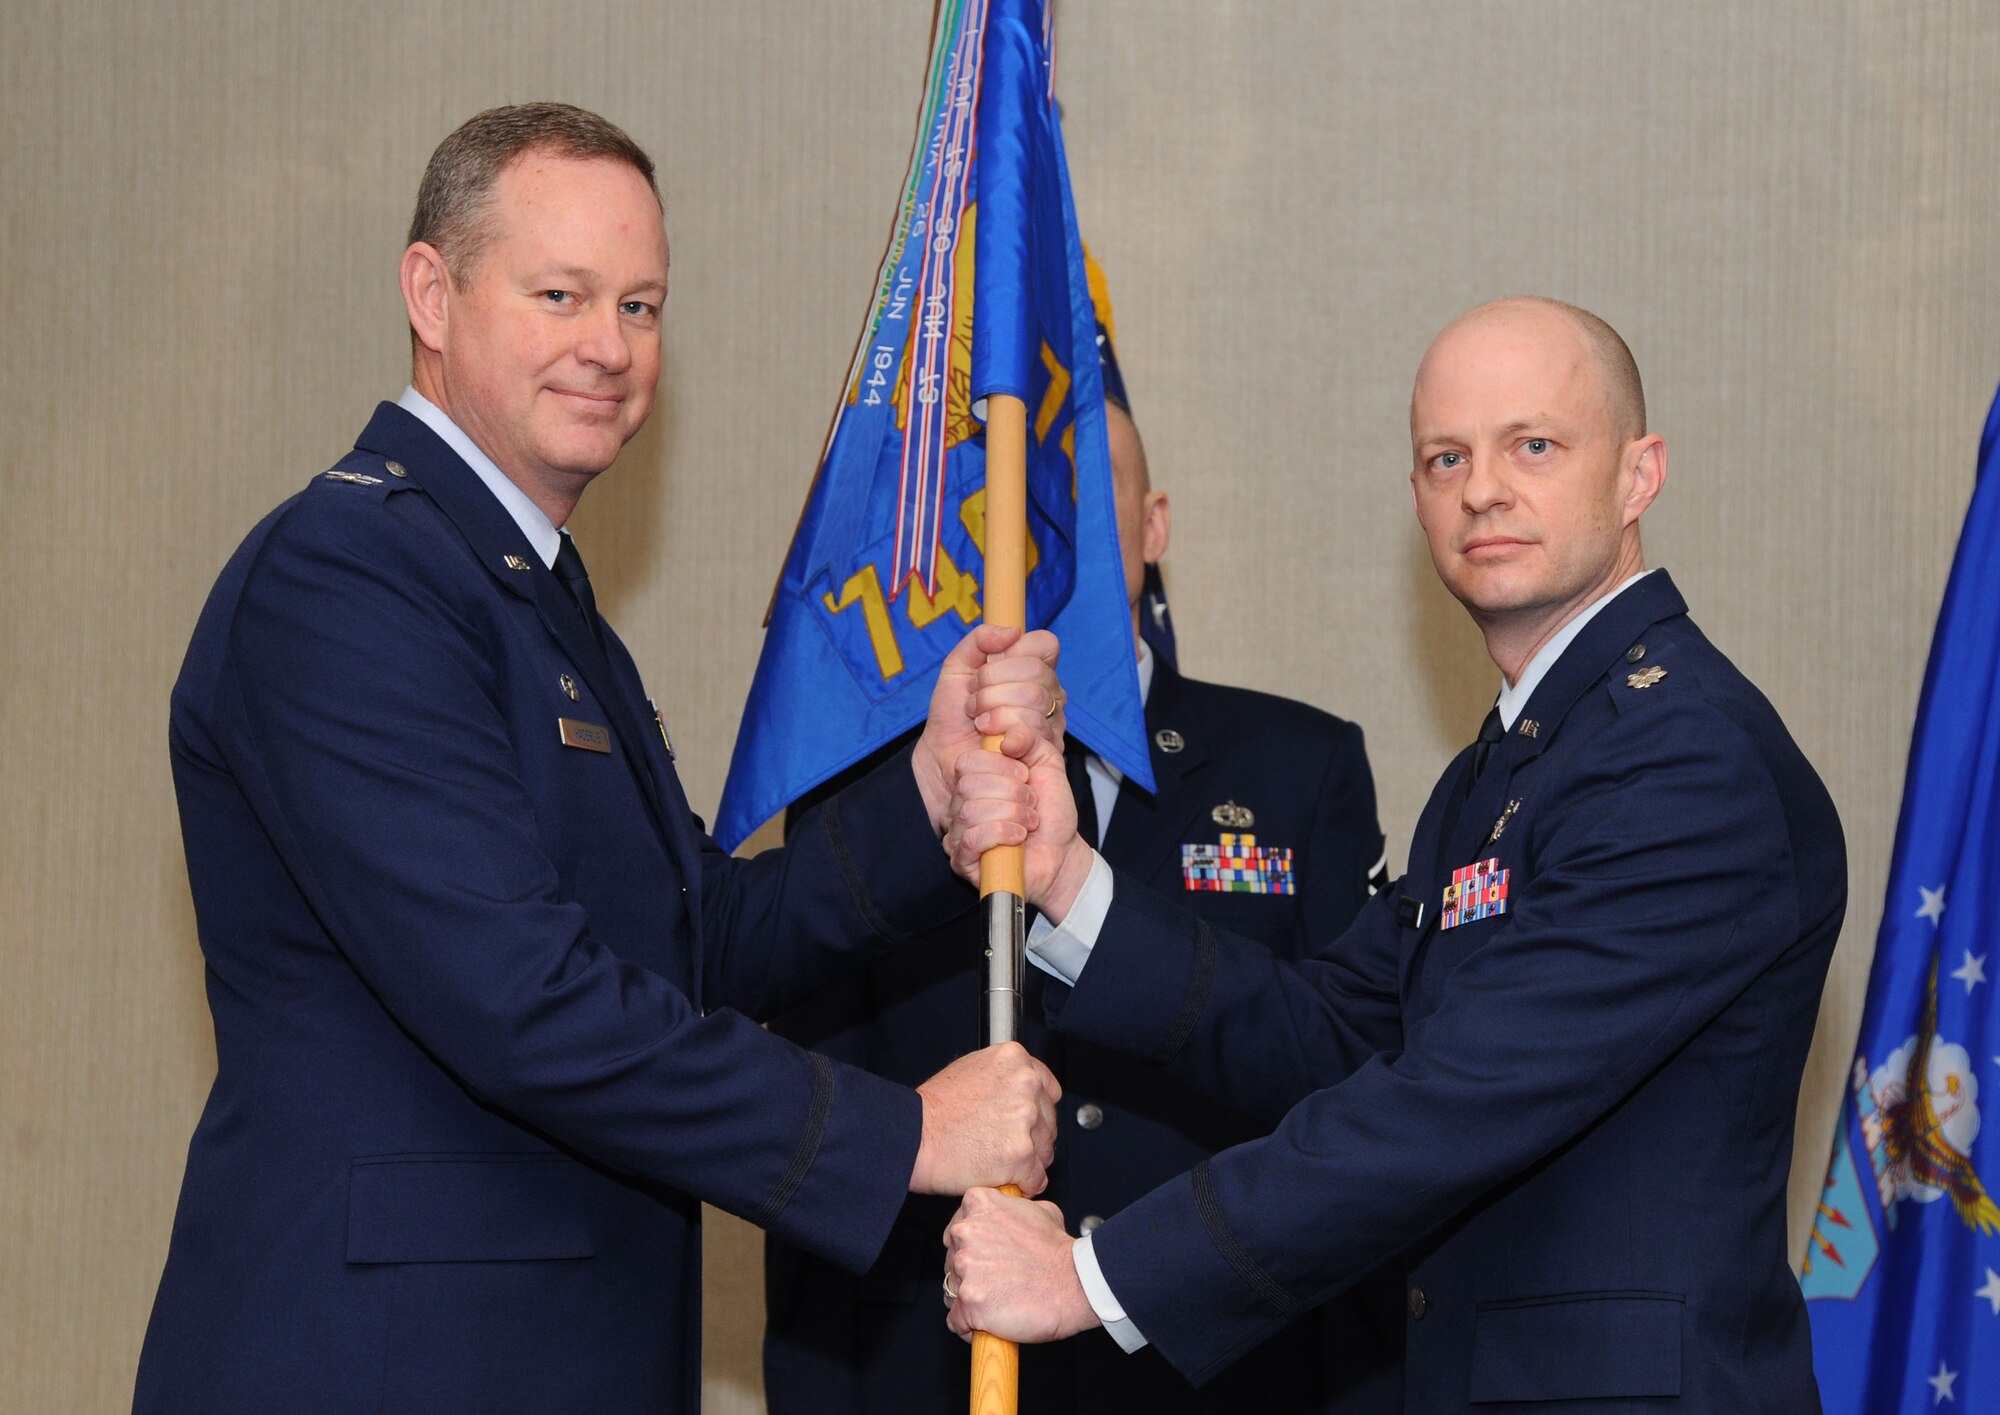 MINOT AIR FORCE BASE, N.D. --  Col. Bryan Haderlie, 91st Operations Group commander, hands off the 740th Missile Squadron guidon to Lt. Col. David Rickards, incoming 740th MS commander, during a Change of Command ceremony here, Jan. 17. The change of command also comes as part of a celebration signifying  50 years of the Missile Wing's mission of protecting and maintaining America’s missile assets. (U.S. Air Force photo/Airman 1st Class Andrew Crawford) 